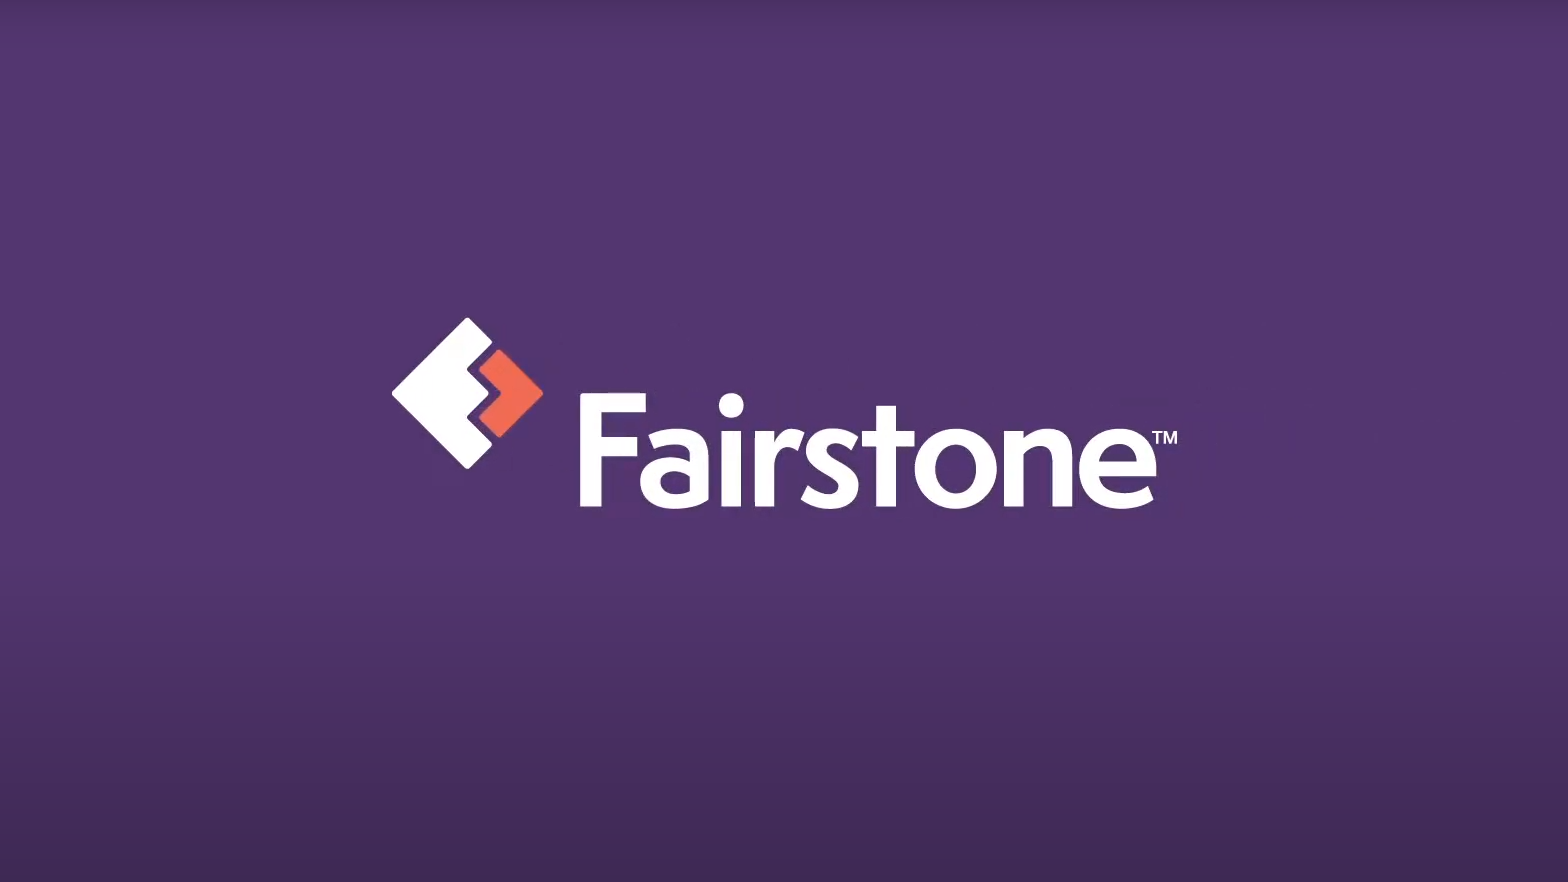 Learn more about Fairstone Loans. Source: Youtube Fairstone.